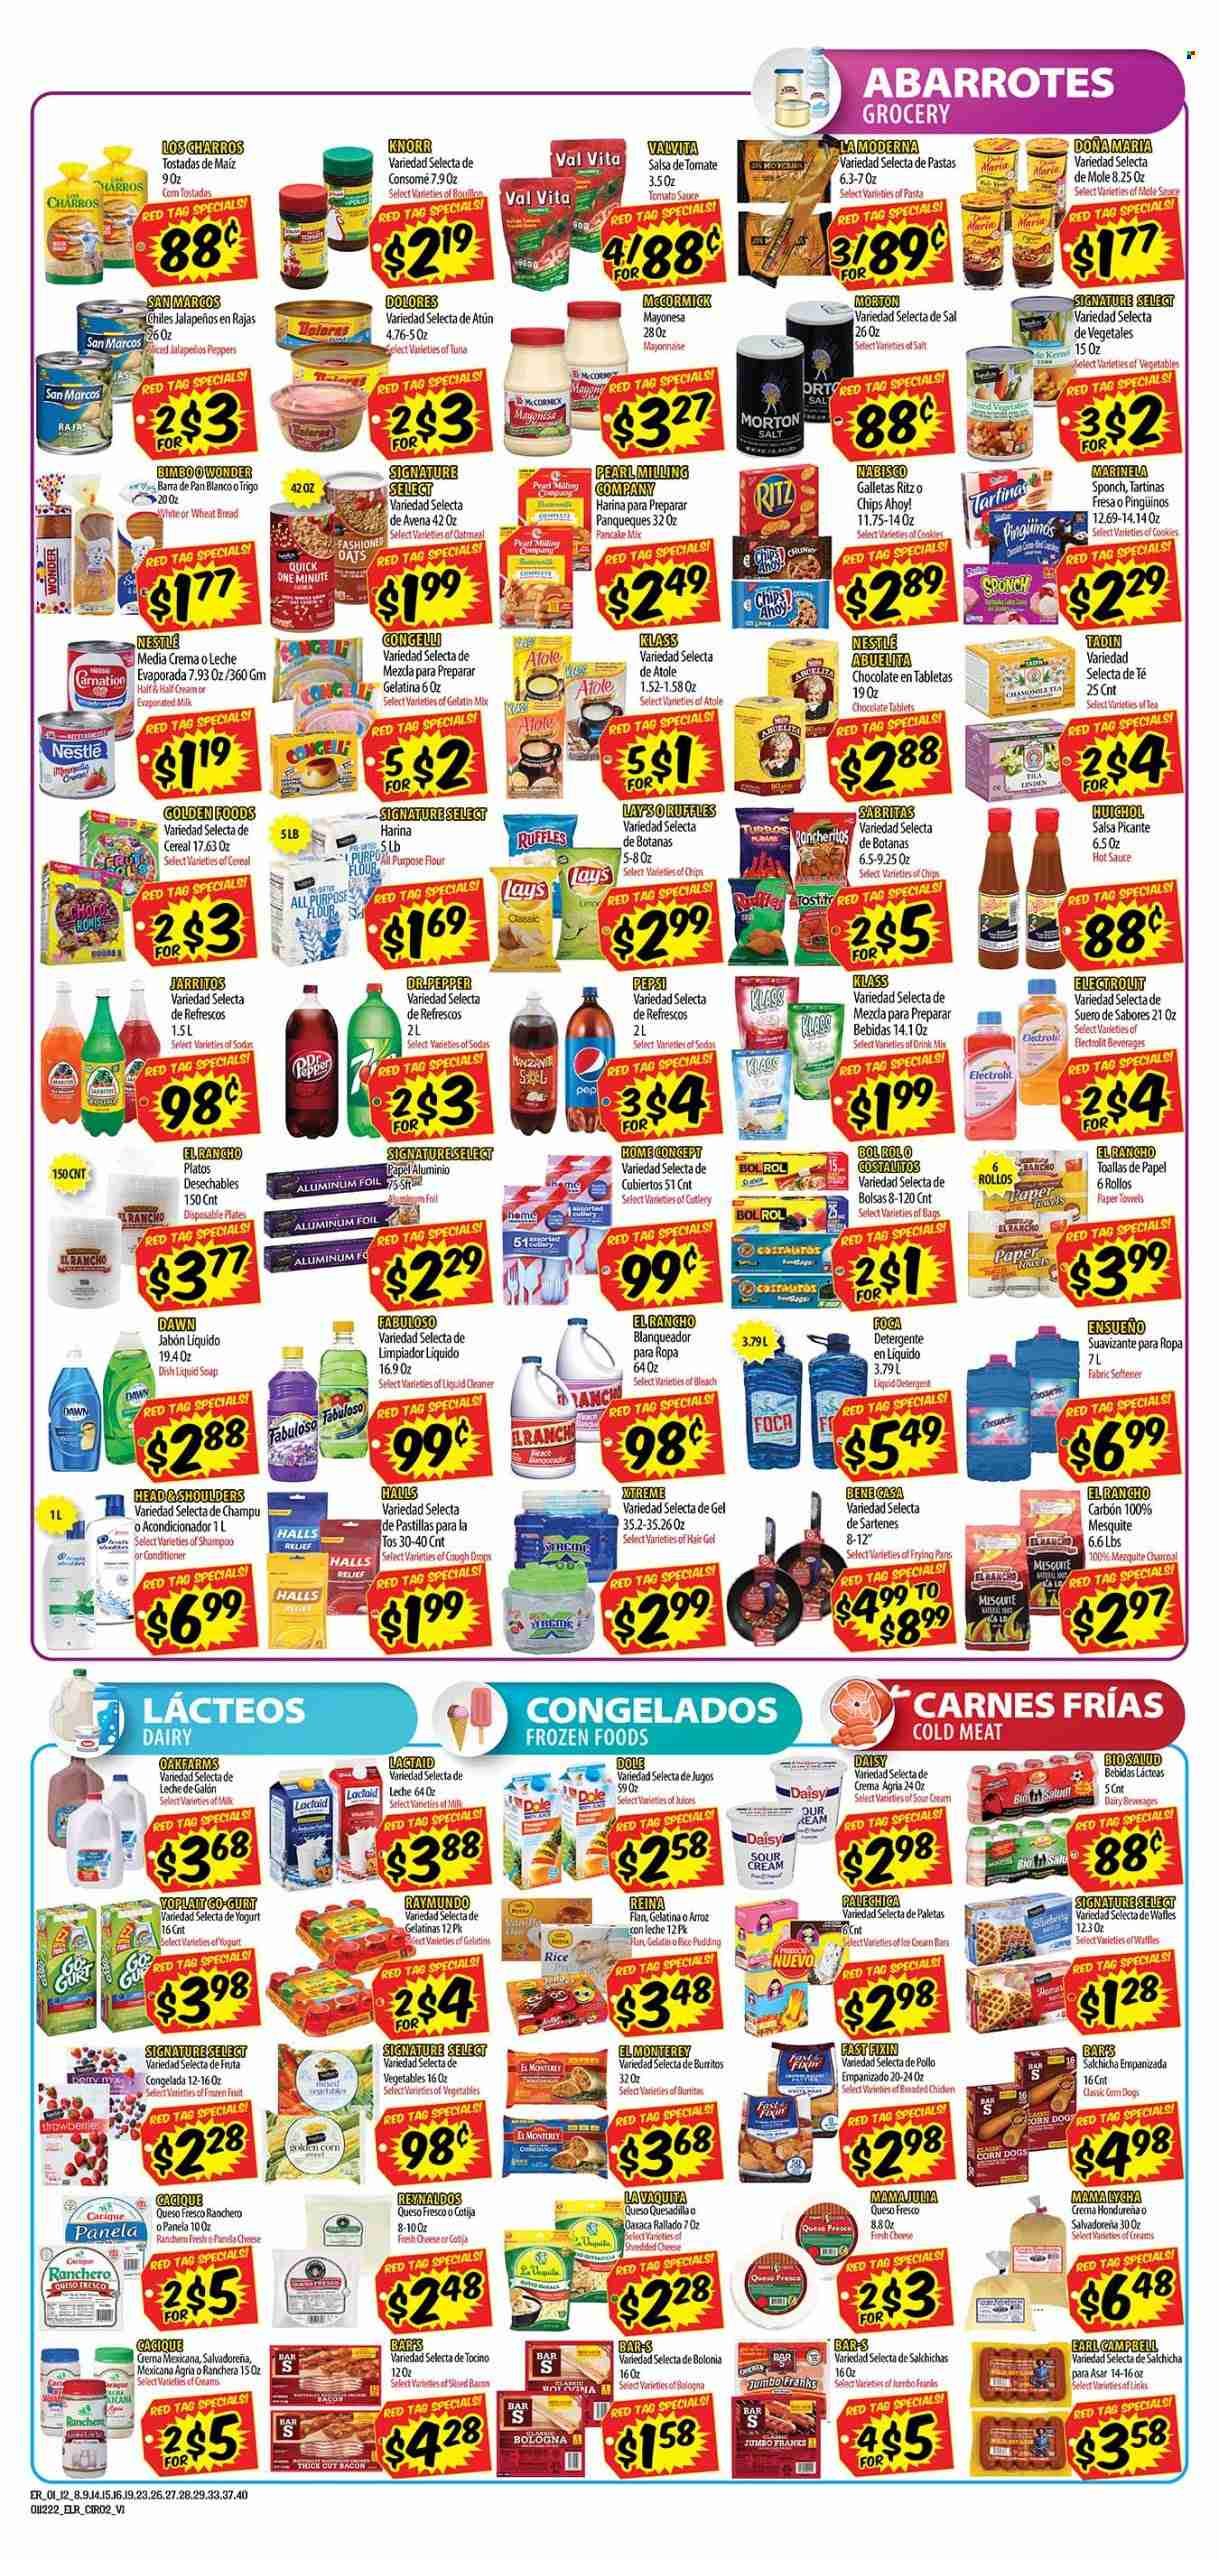 thumbnail - El Rancho Flyer - 01/12/2022 - 01/18/2022 - Sales products - Fast Fixin', wheat bread, tostadas, waffles, Dole, peppers, tuna, pasta, Knorr, sauce, fried chicken, pancakes, burrito, bacon, bologna sausage, Lactaid, shredded cheese, queso fresco, Panela cheese, yoghurt, Yoplait, rice pudding, evaporated milk, sour cream, mayonnaise, cookies, Nestlé, Halls, chocolate, Chips Ahoy!, RITZ, Lay’s, Ruffles, flour, oatmeal, oats, tomato sauce, cereals, hot sauce, salsa, Pepsi, juice, Dr. Pepper, tea. Page 2.